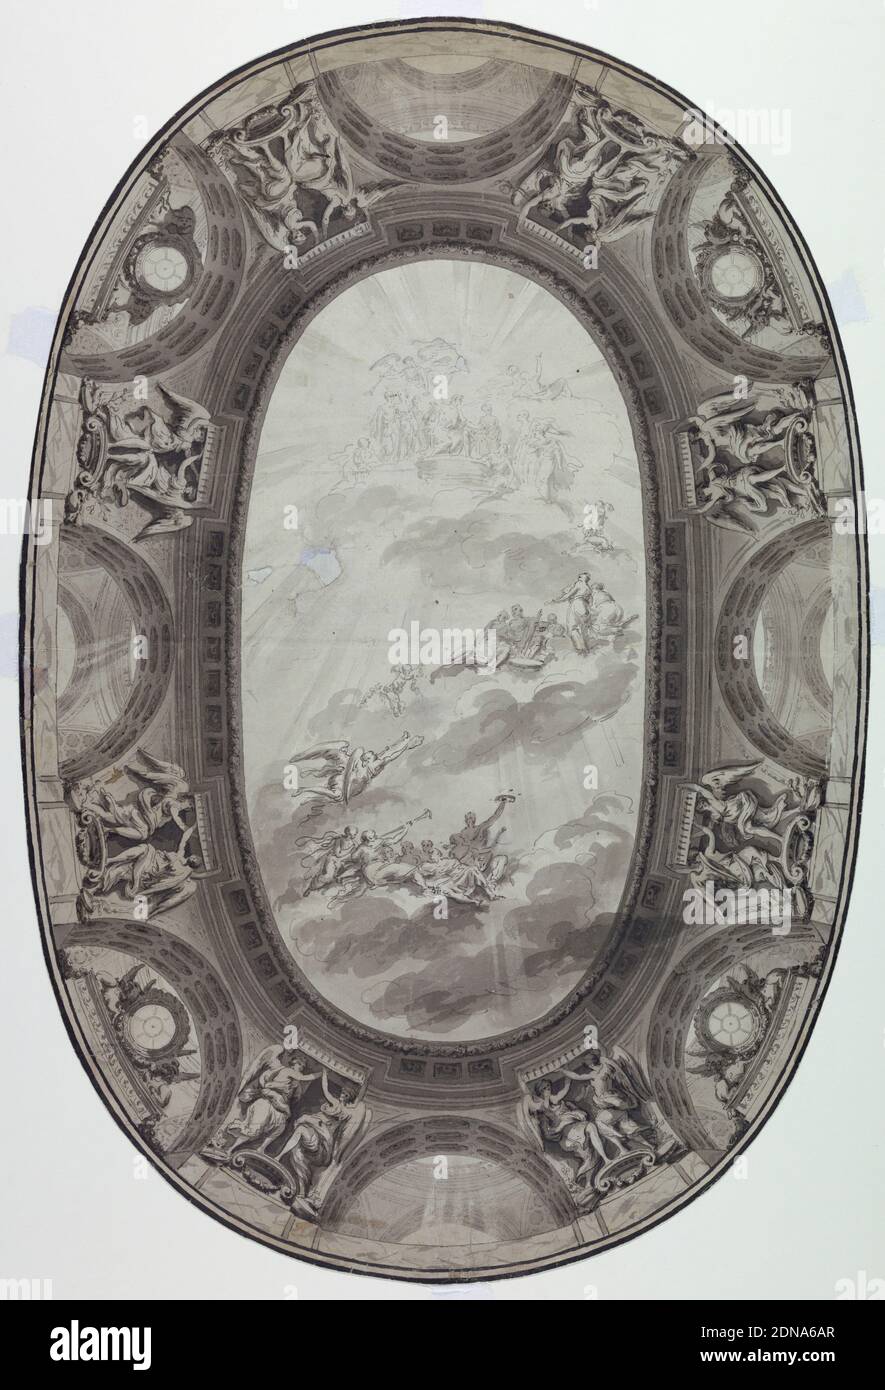 Project for the Painted Decoration of the Ceiling of a Hall (Painted Oval Ceiling), Jean Baptiste-Marie Pierre, French, 1714 – 1789, Pen and black ink, brush and gray and black wash on two sheets of off-white heavy laid paper joined together horizonatally, lined, Image of an oval ceiling, without the room setting. At the center, a view at the sky passing an oval entablature. In the sky are Apollo, the Muses and genii. The entablature is supported by arches through which parts of further structures are shown. In four of the arches stand pedestals with griffins crouching beside a clock-like form Stock Photo